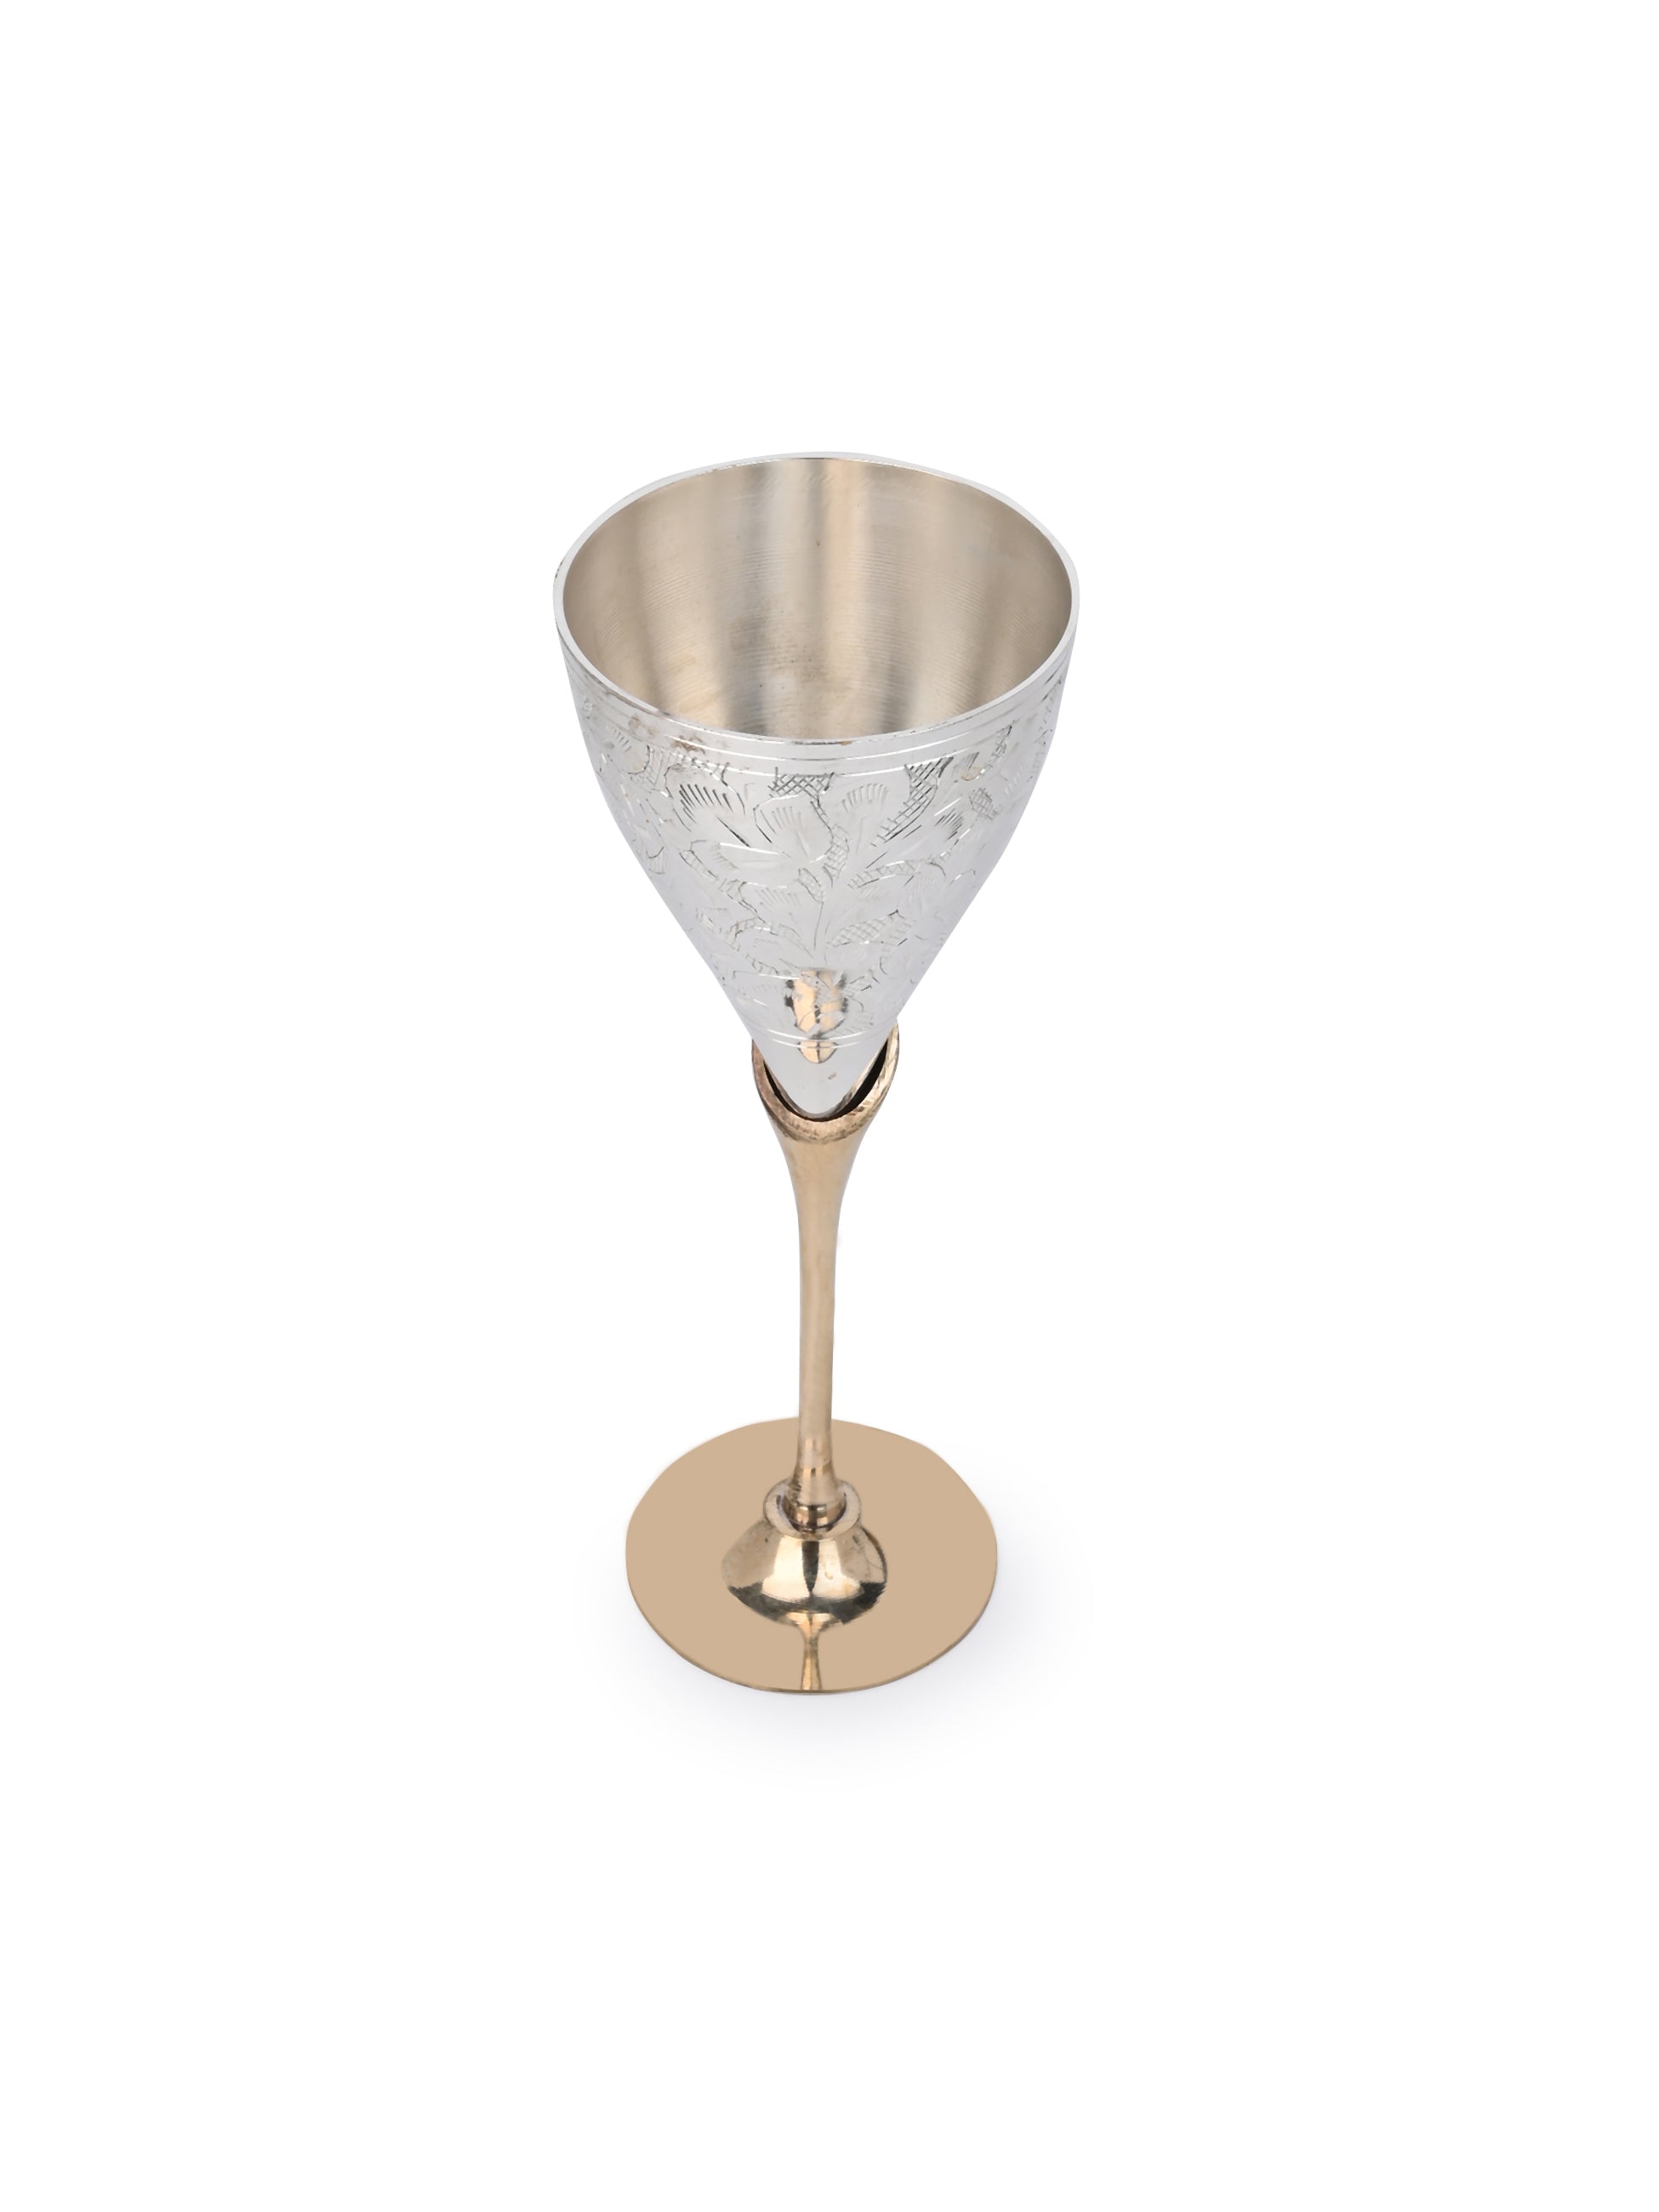 Brass Crafted Luxury Wine Goblets - Set of 2 in Red Velvet Gift box